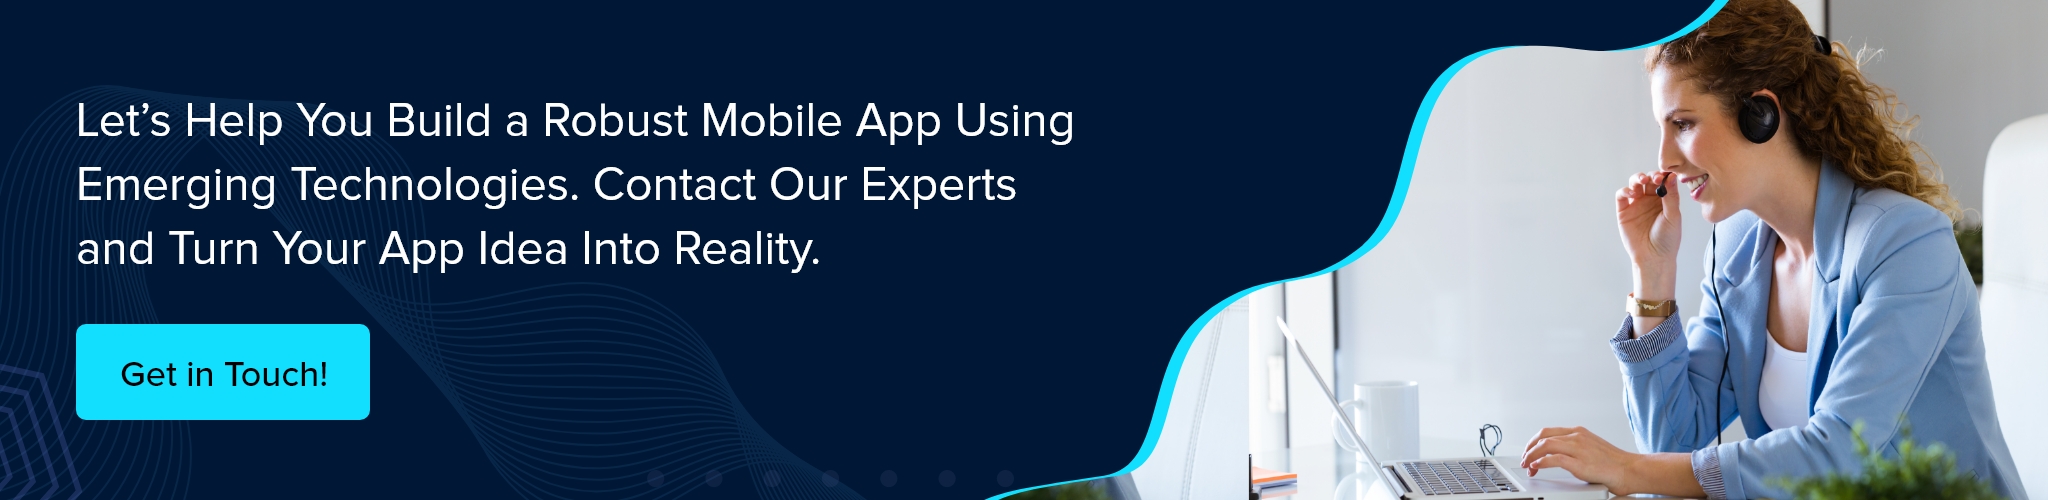 Let us help you with mobile app technologies